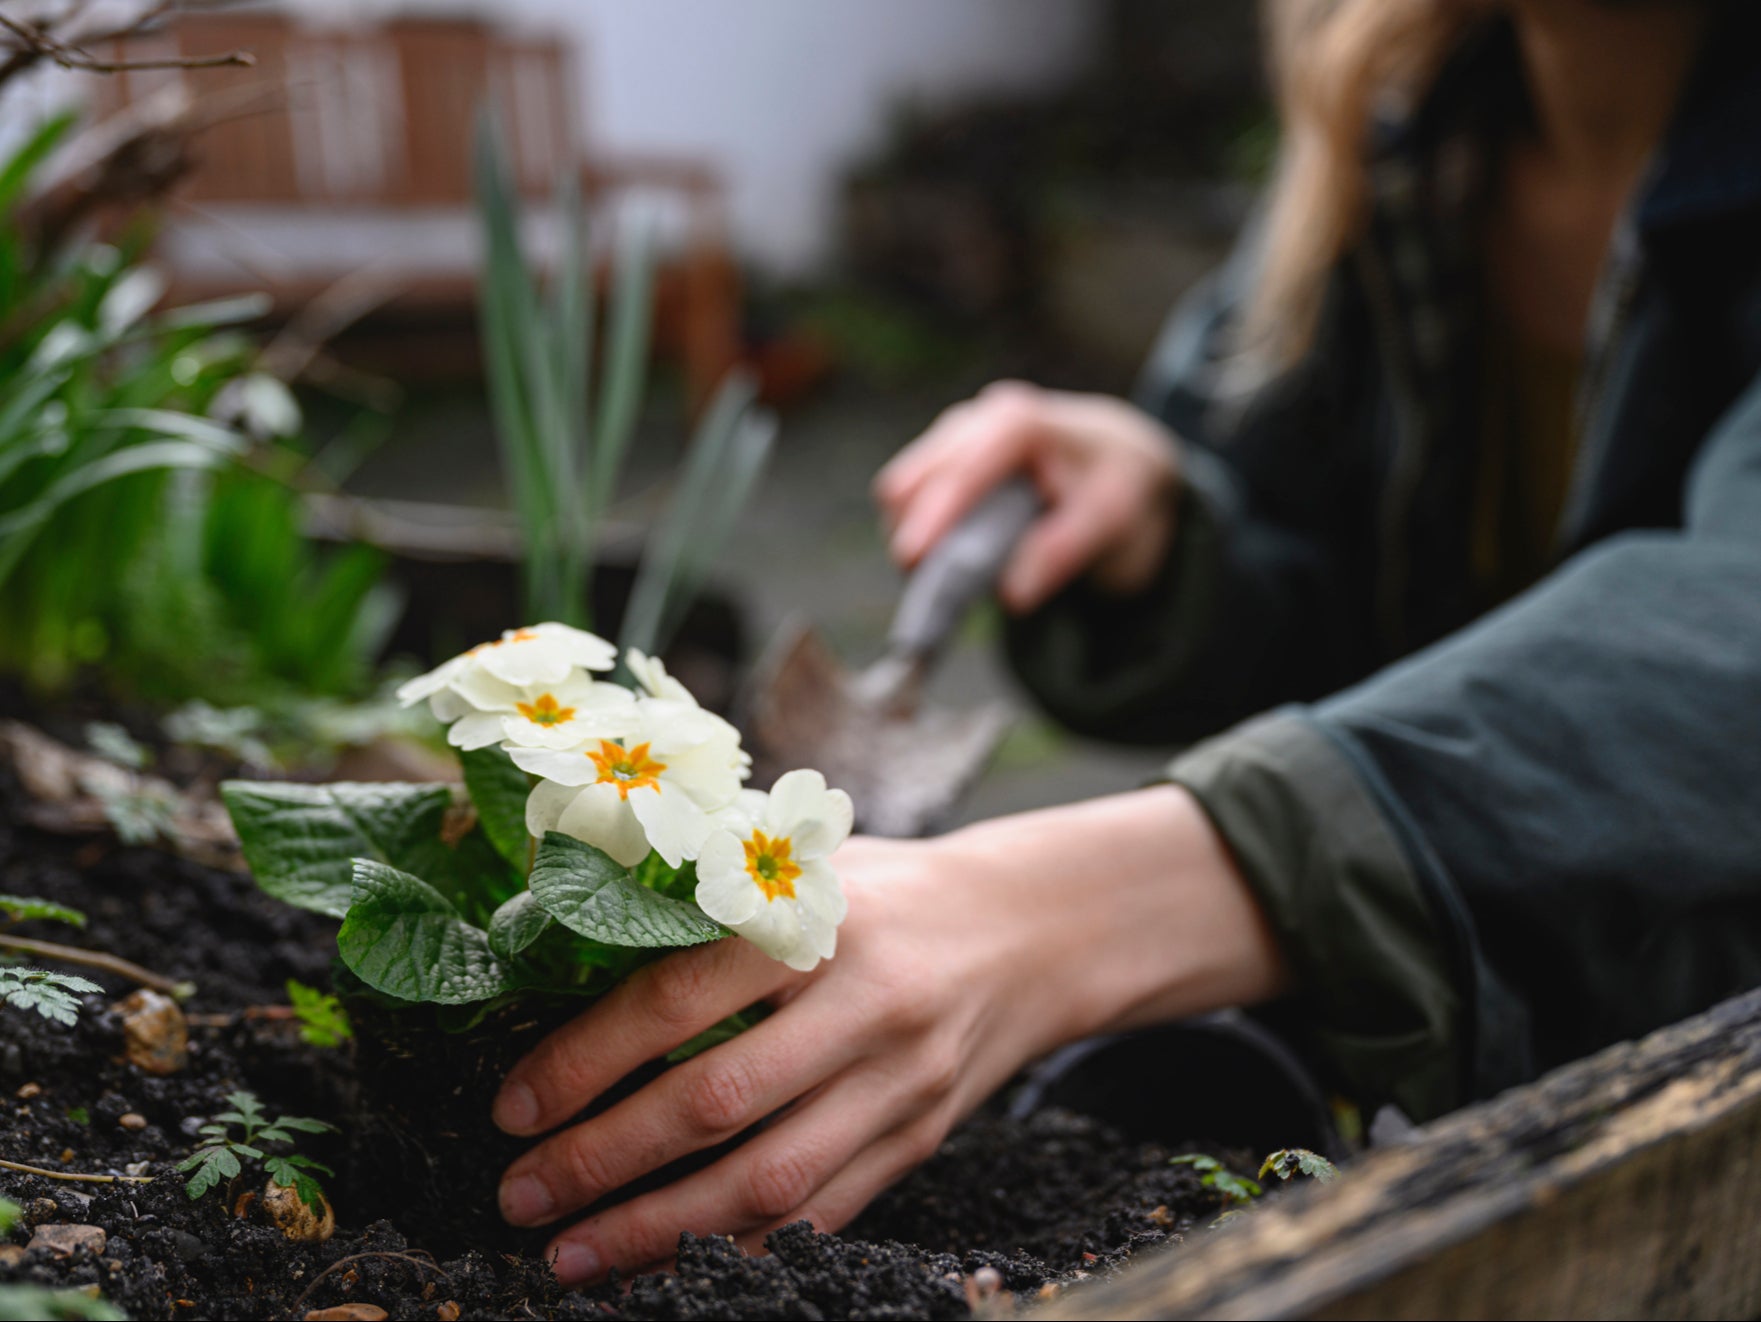 One-third of Britons have developed a greater interest in gardening since the coronavirus pandemic hit